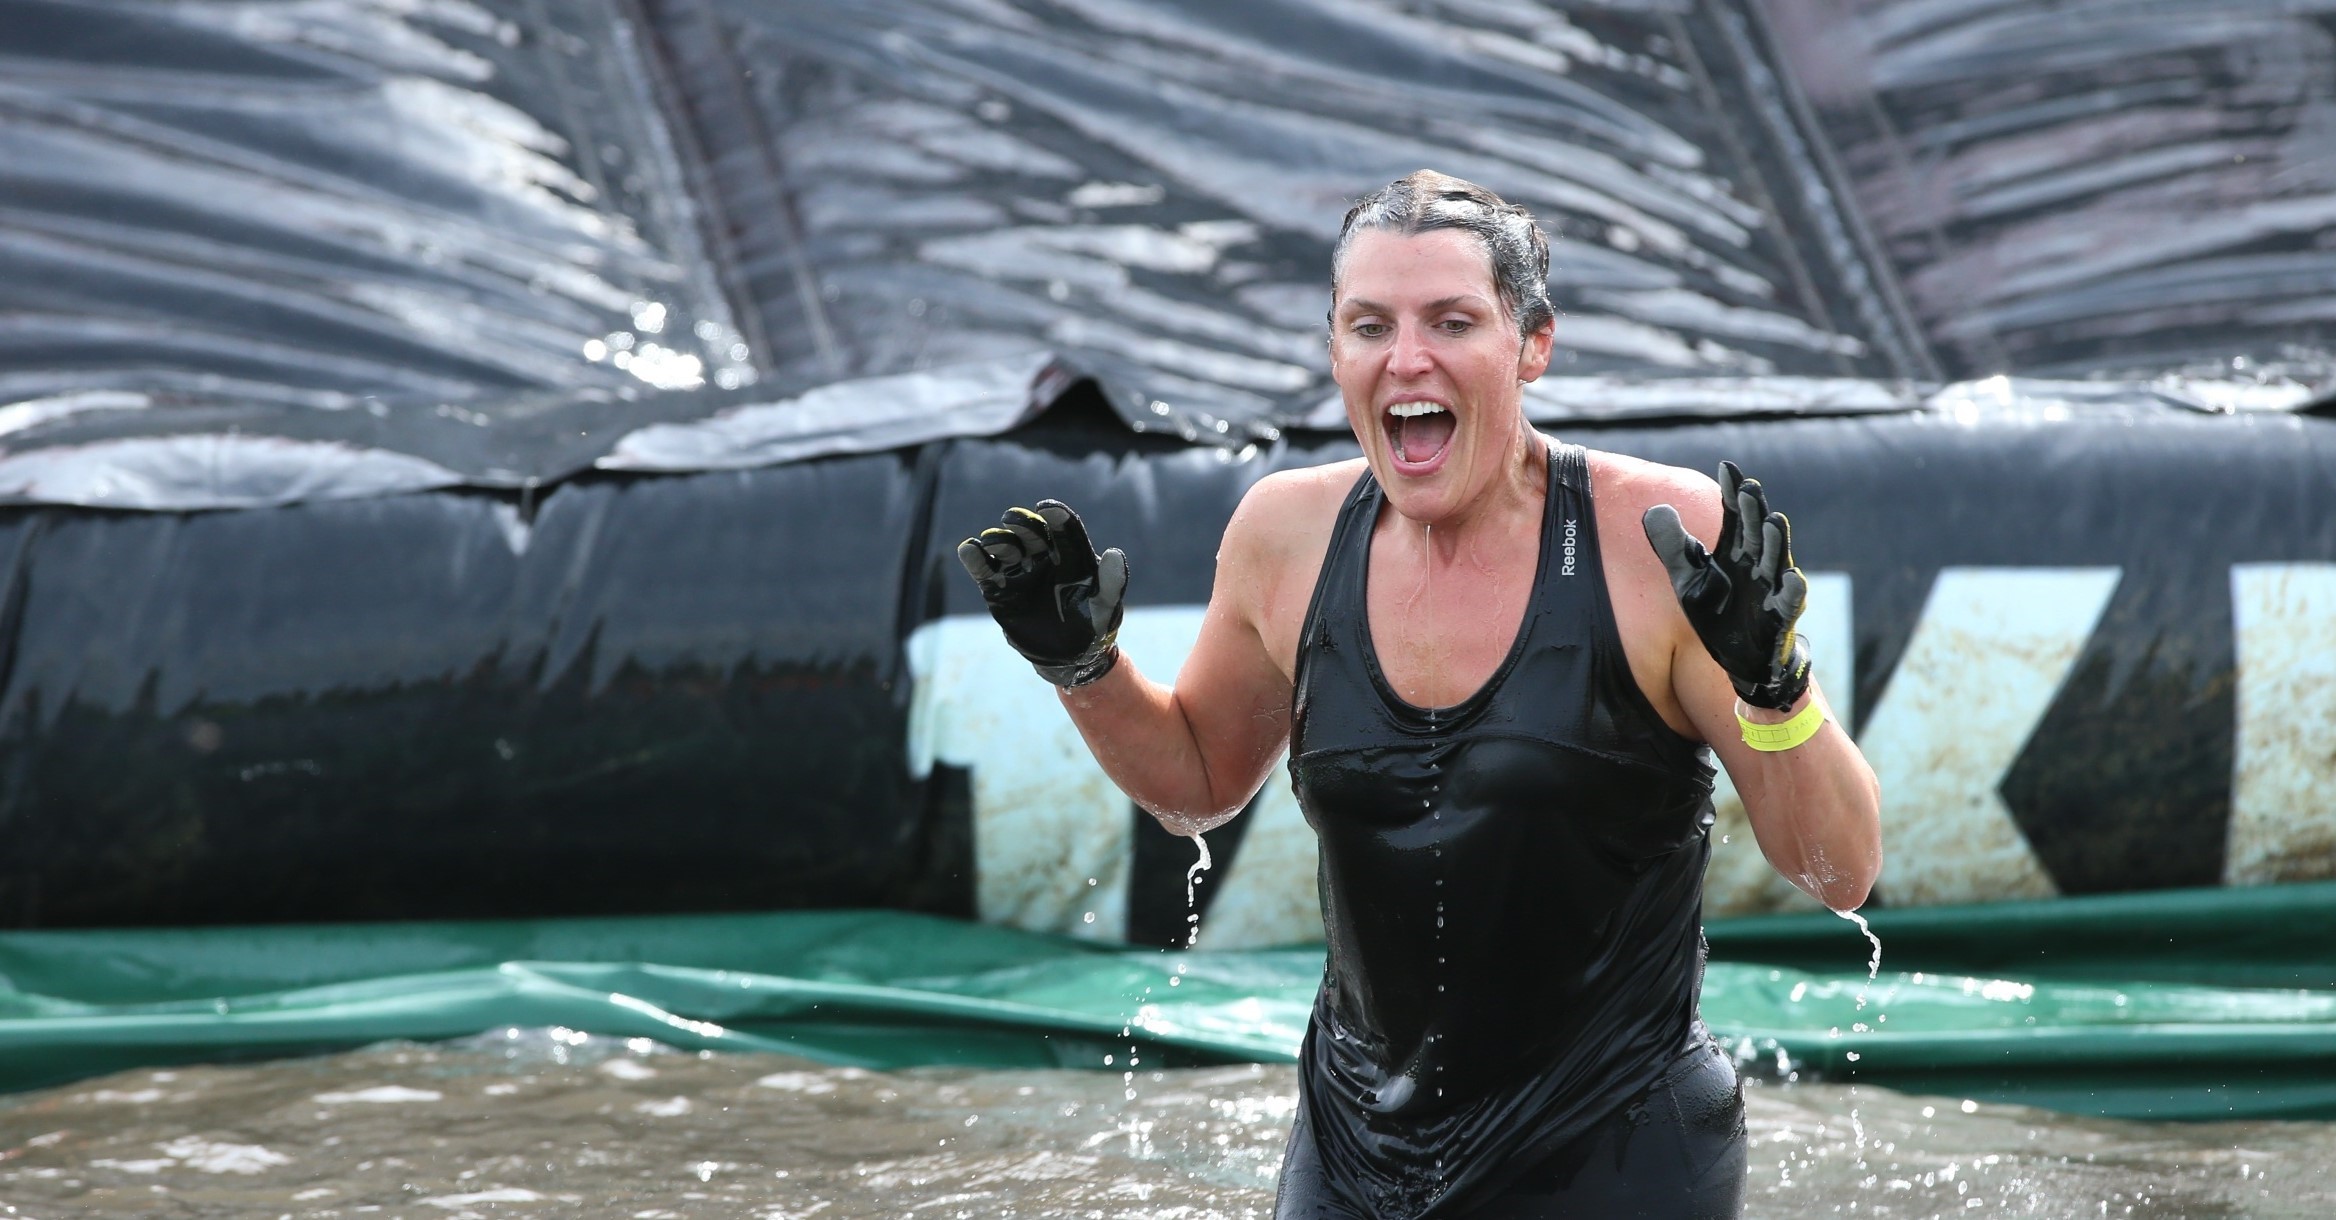 The Hull-timate Challenge is a 30-piece urban obstacle course to raise awareness of Hull’s flood risk.